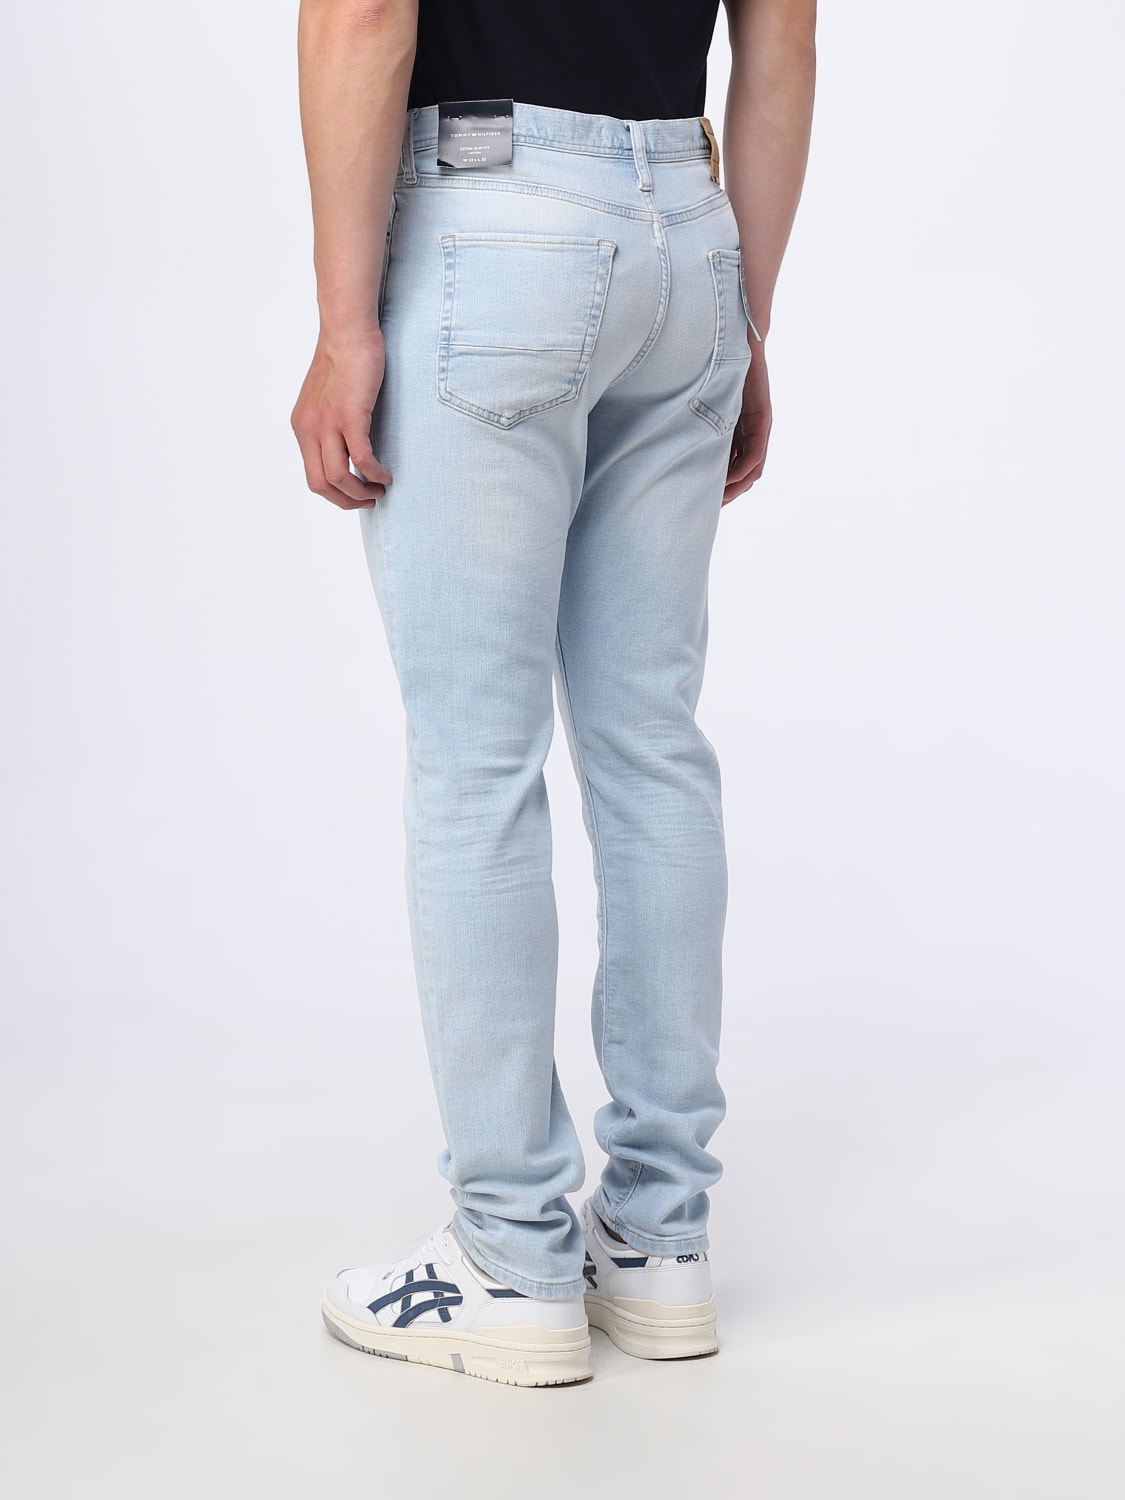 TOMMY HILFIGER: jeans for man - Stone Washed Tommy Hilfiger jeans MW0MW31099 online on